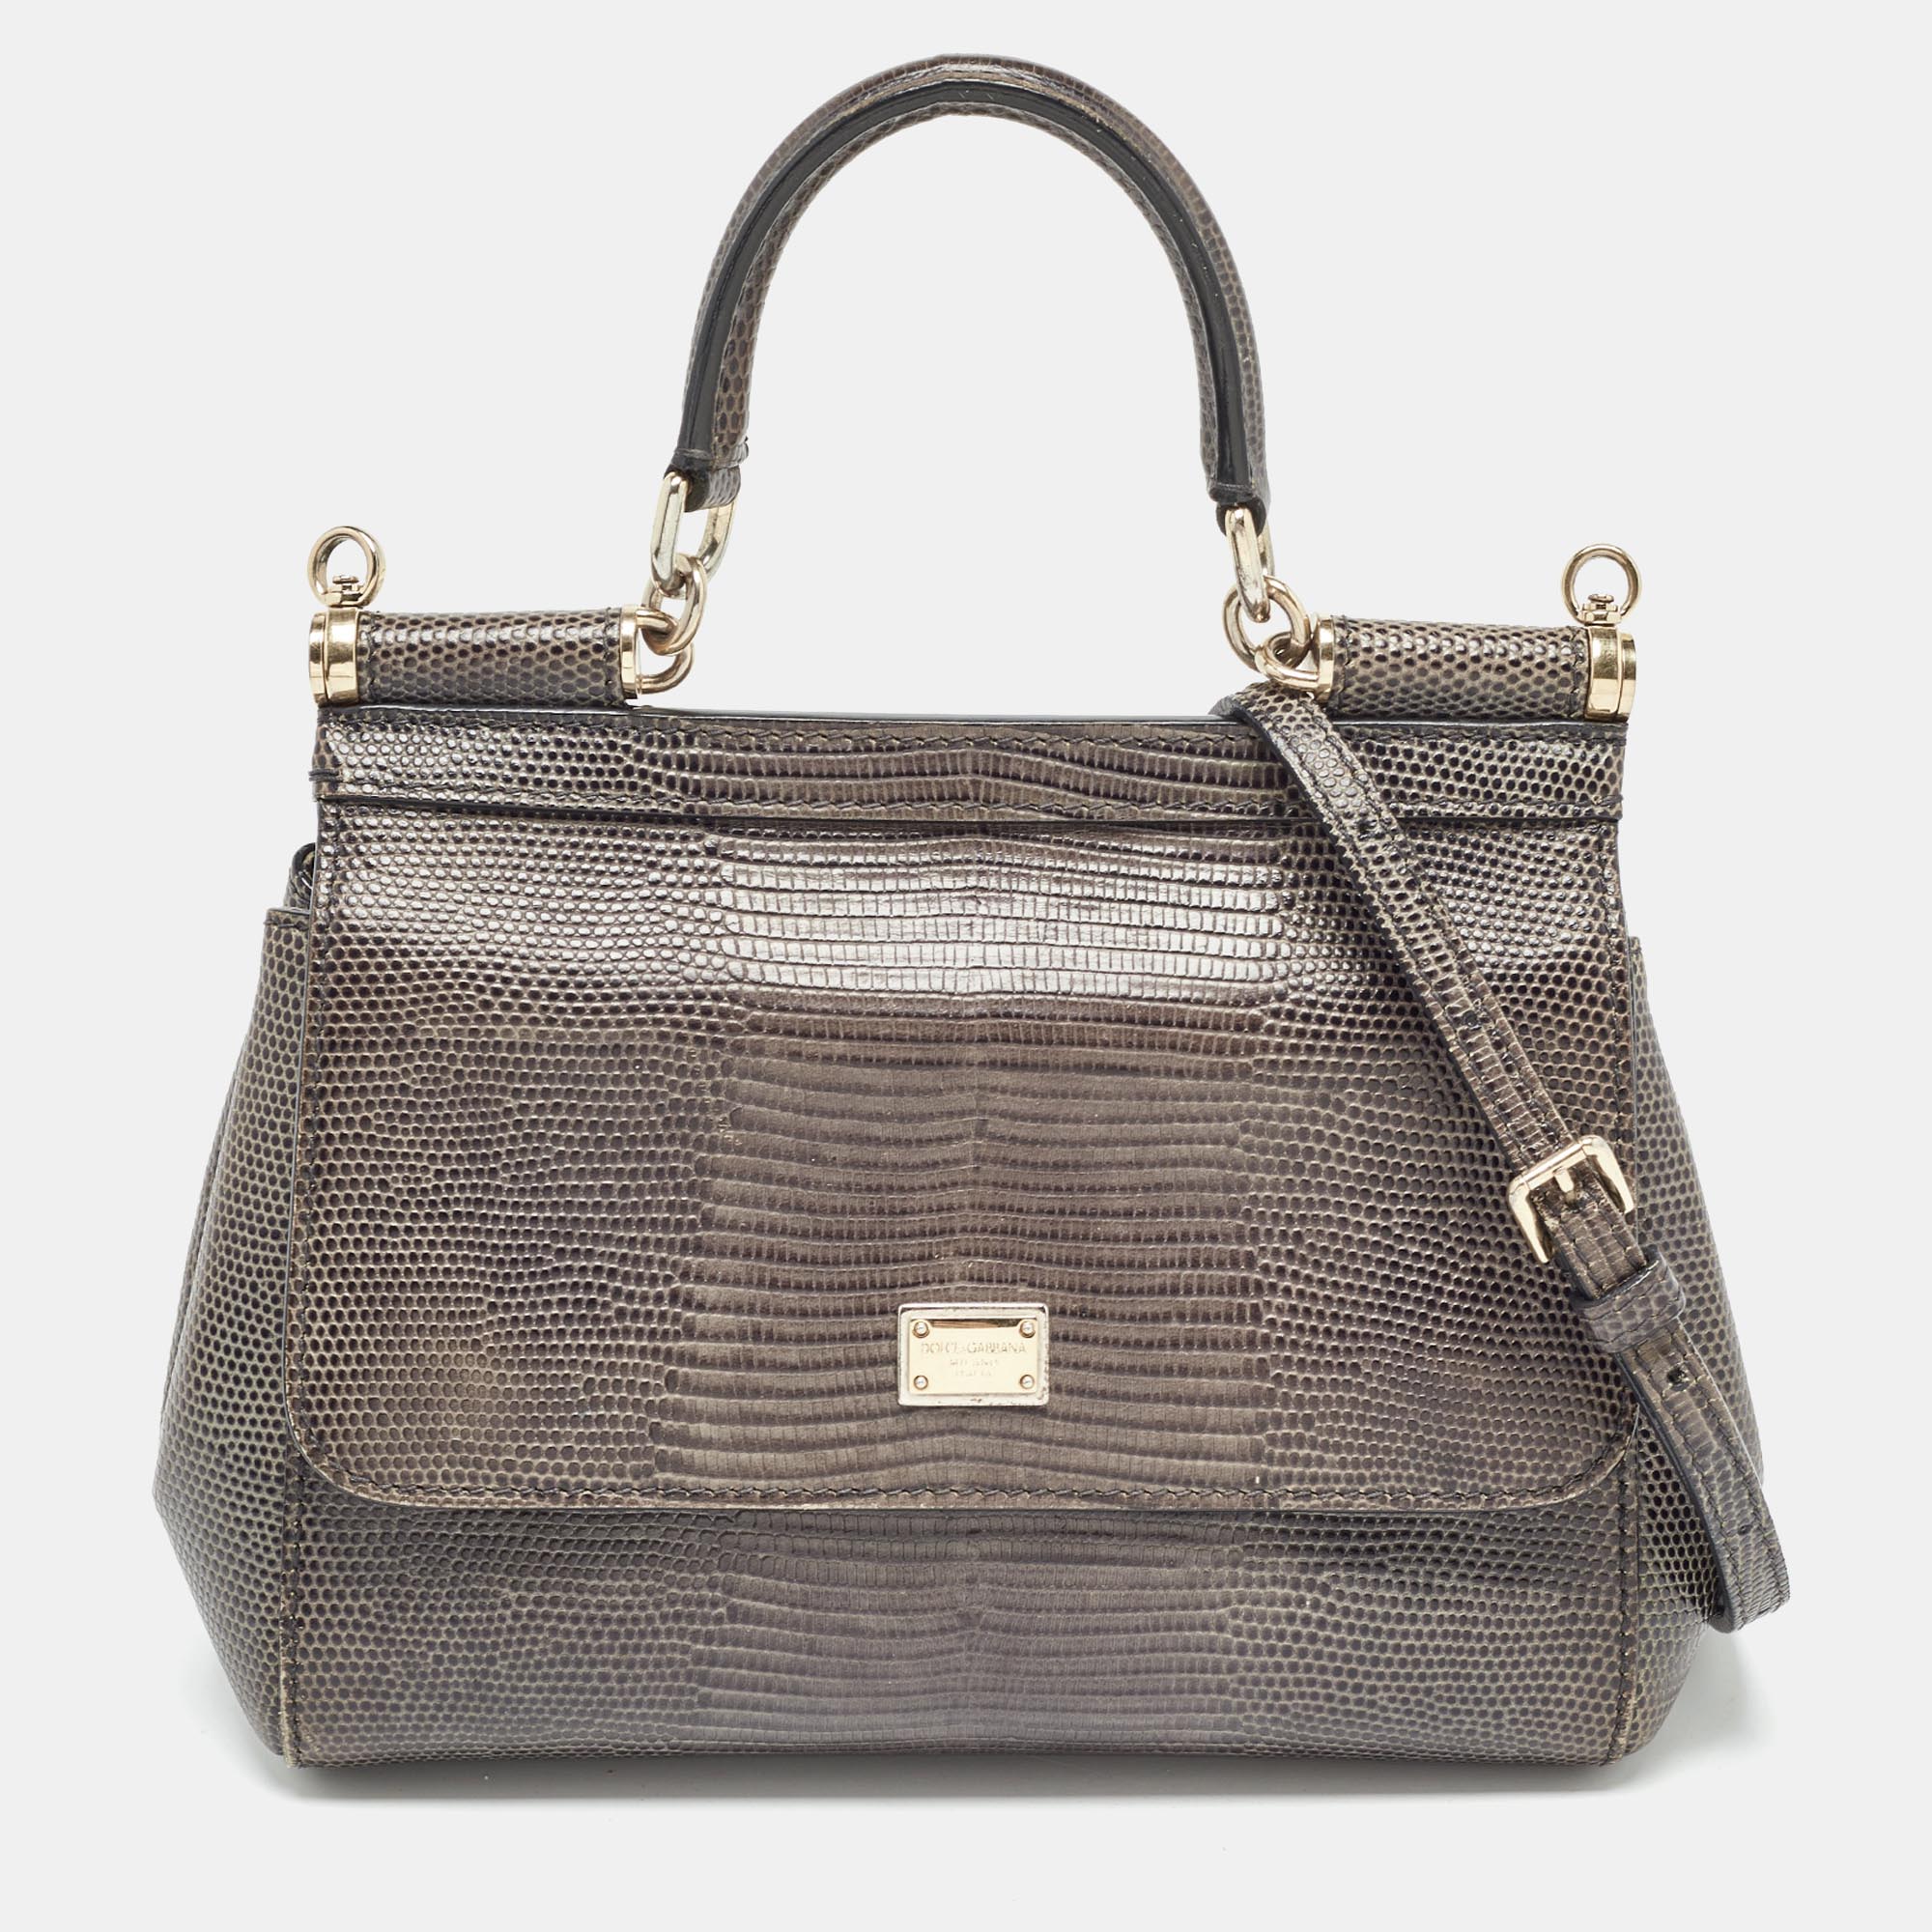 Dolce & gabbana grey lizard embossed leather small miss sicily top handle bag